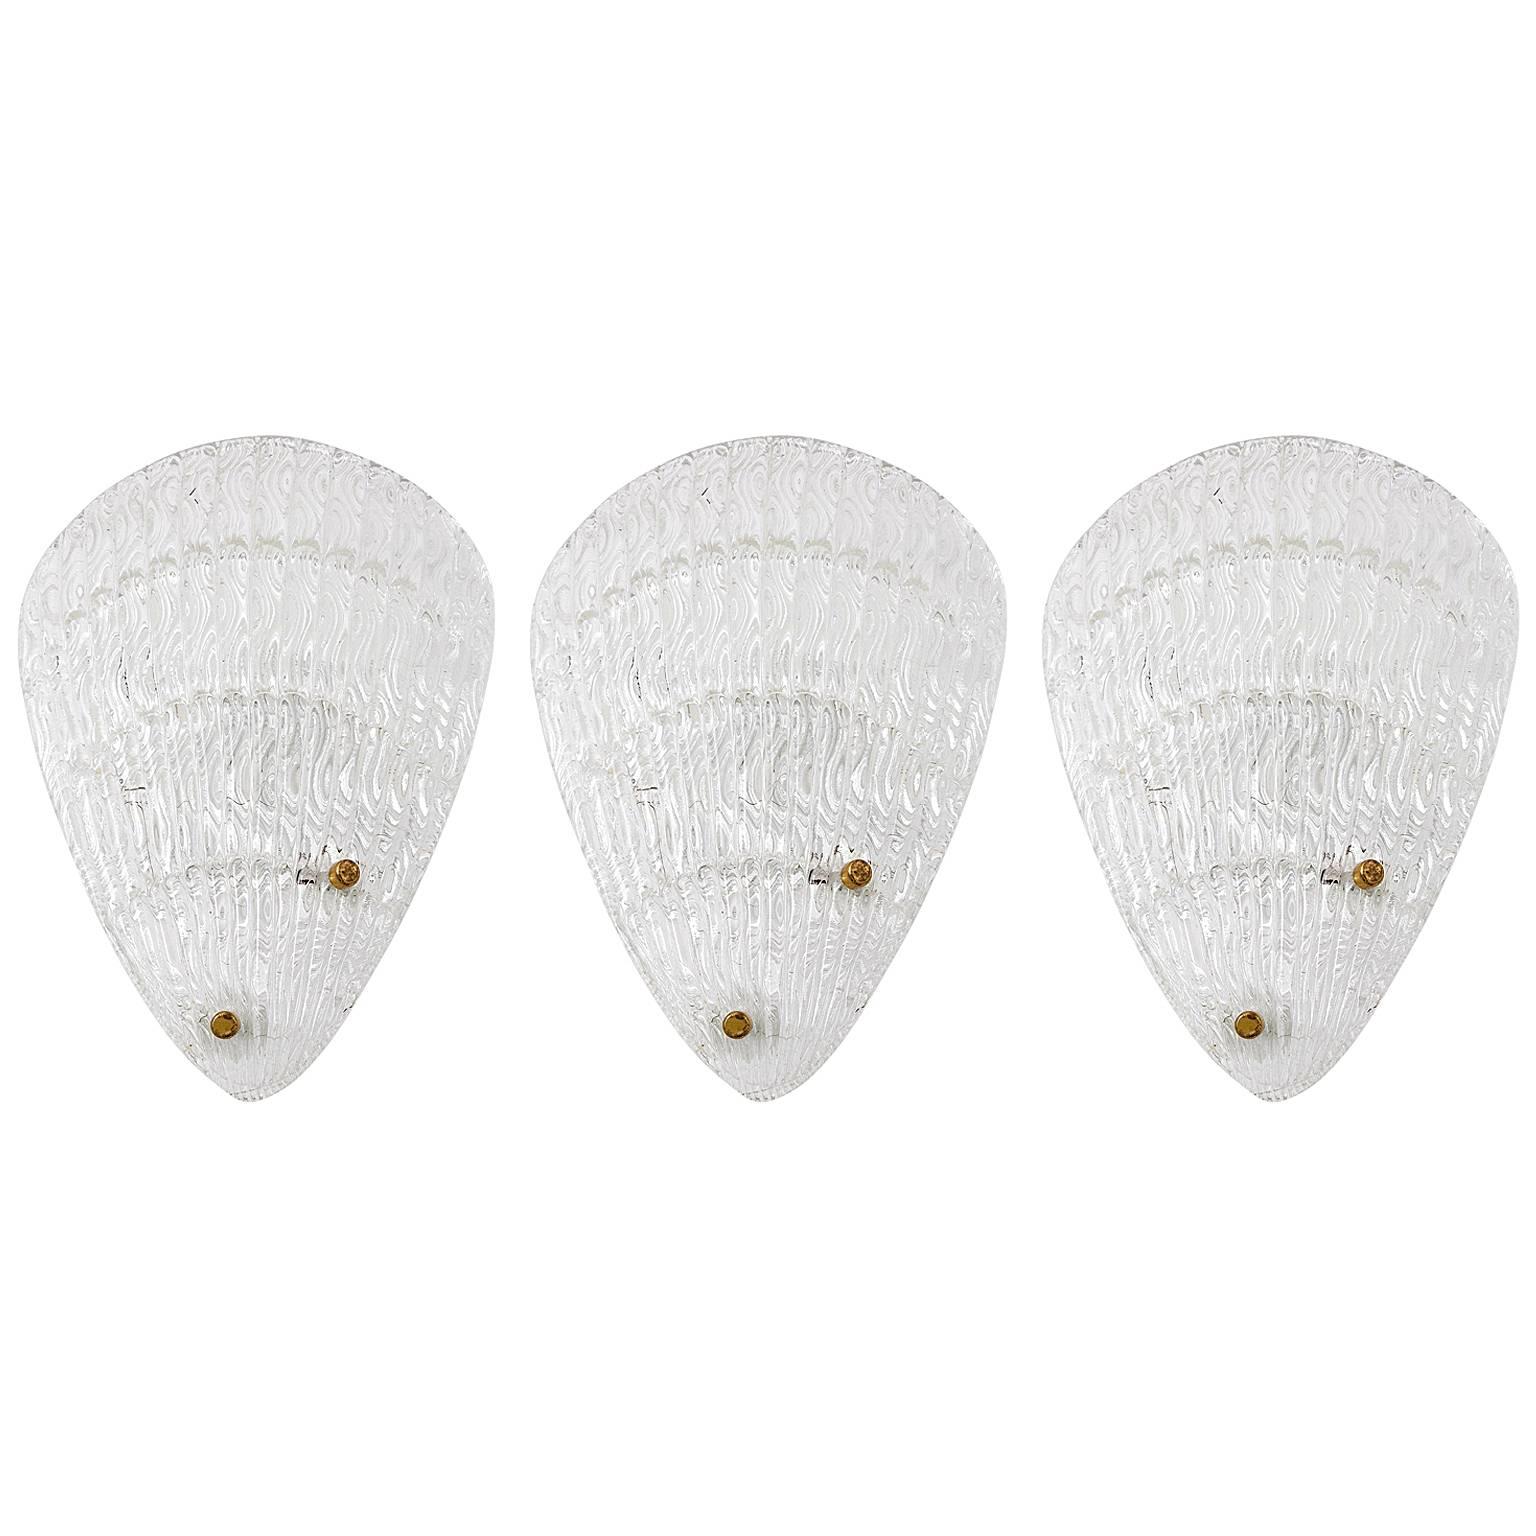 1 of 3 Shell Textured Glass Sconces Wall Lights by Rupert Nikoll, Vienna, 1950s For Sale